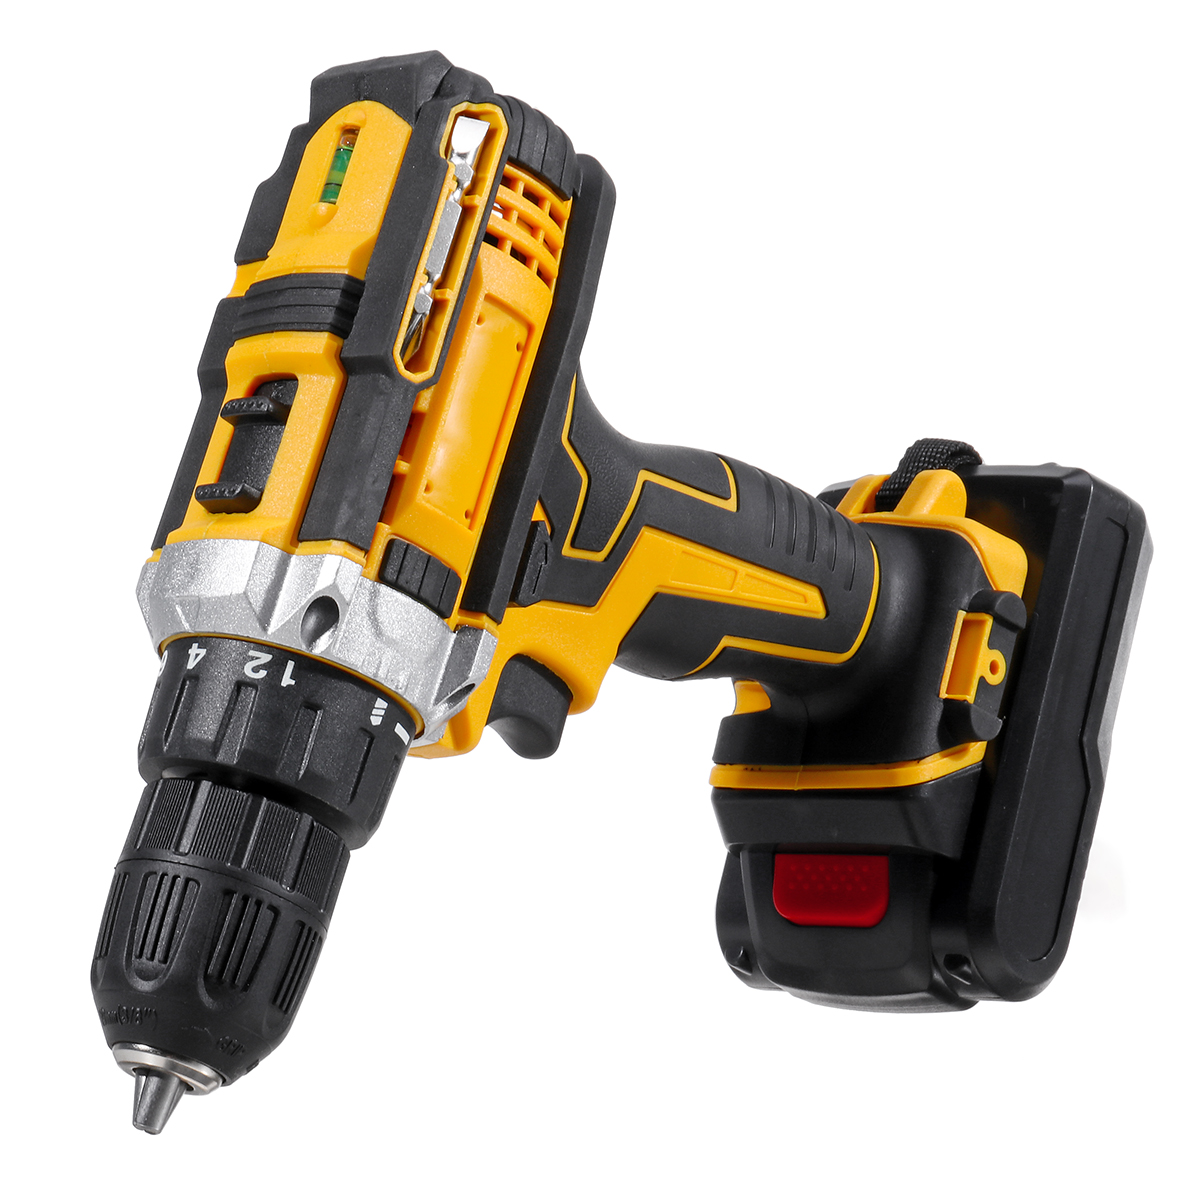 2000rpm-38Nm-21V-Lithium-Electric-Impact-Hammer-Drill-Wood-Drilling-Screwdrivers-with-Battery-1943471-14